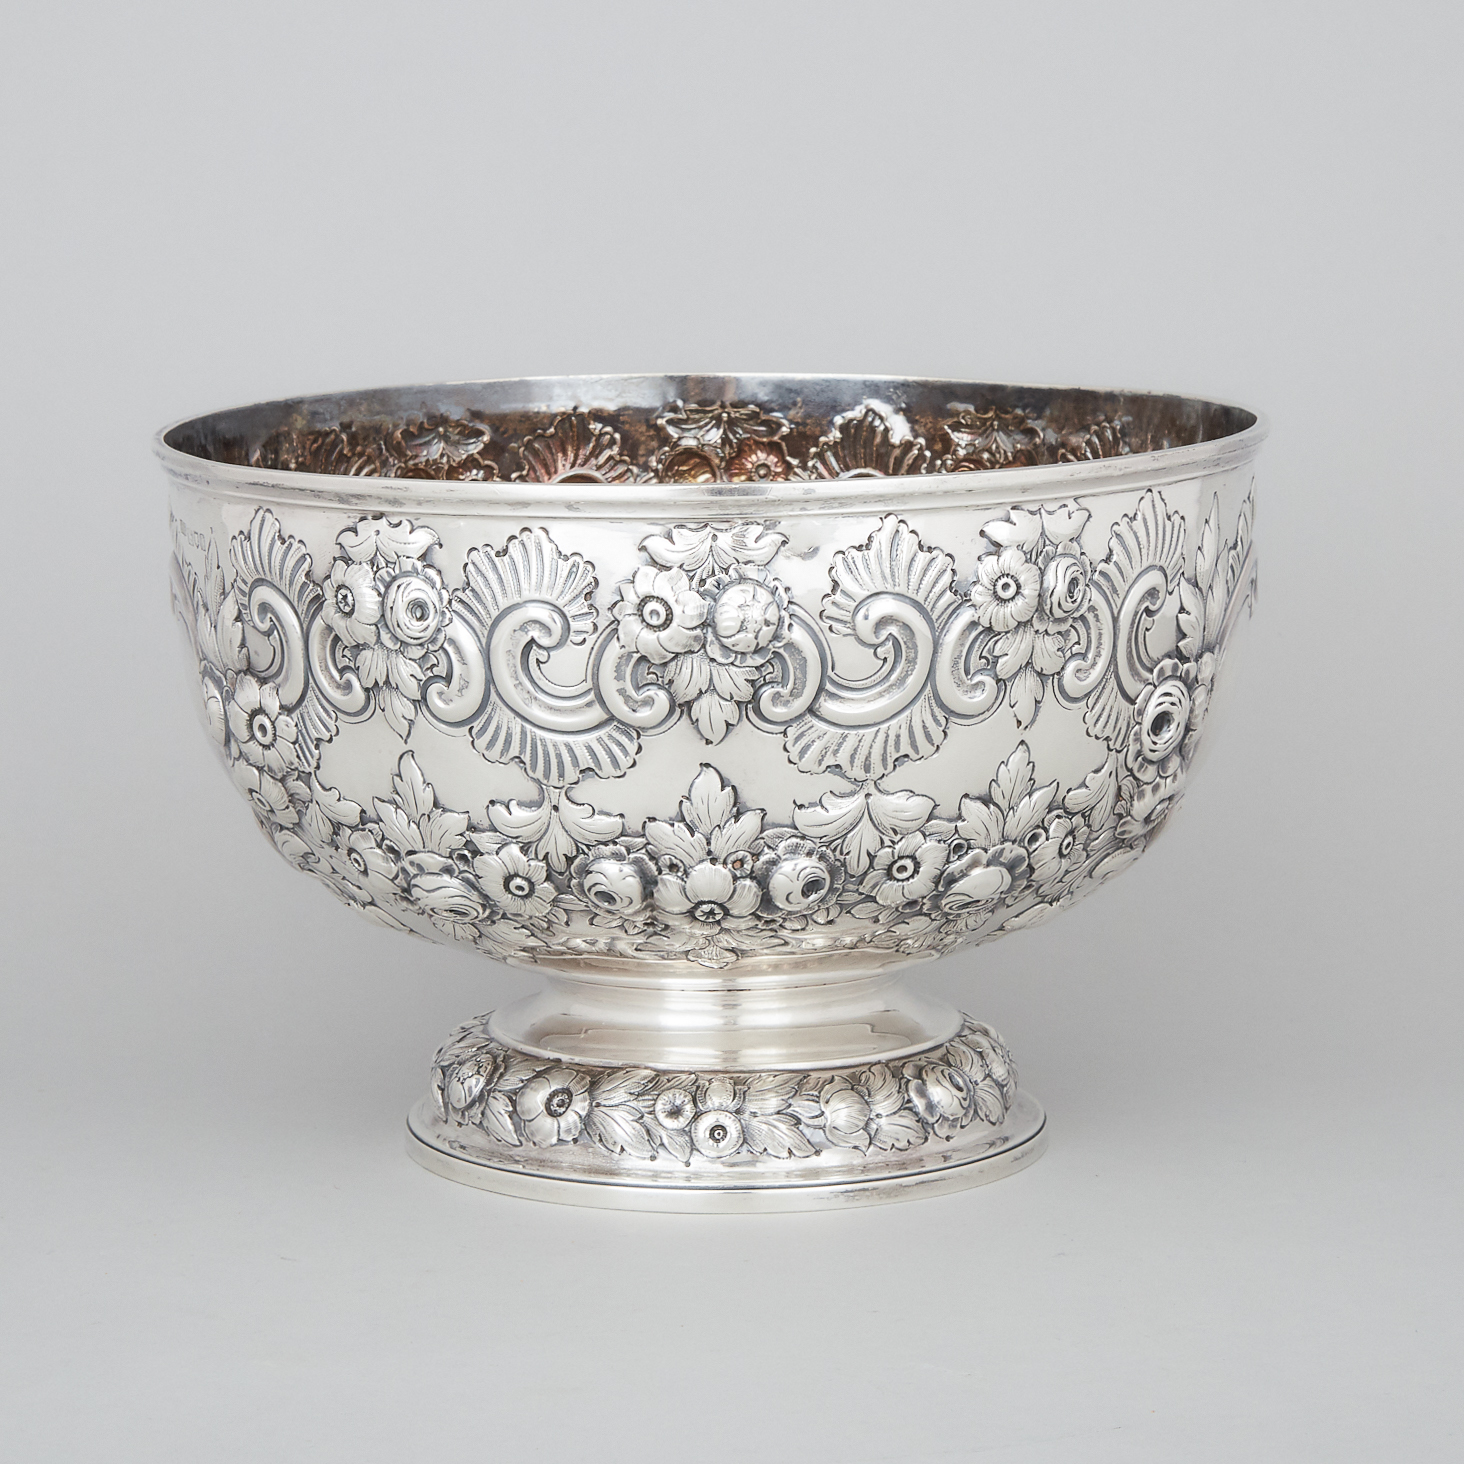 Late Victorian Silver Footed Bowl, Rowlands & Frazer, London, 1898